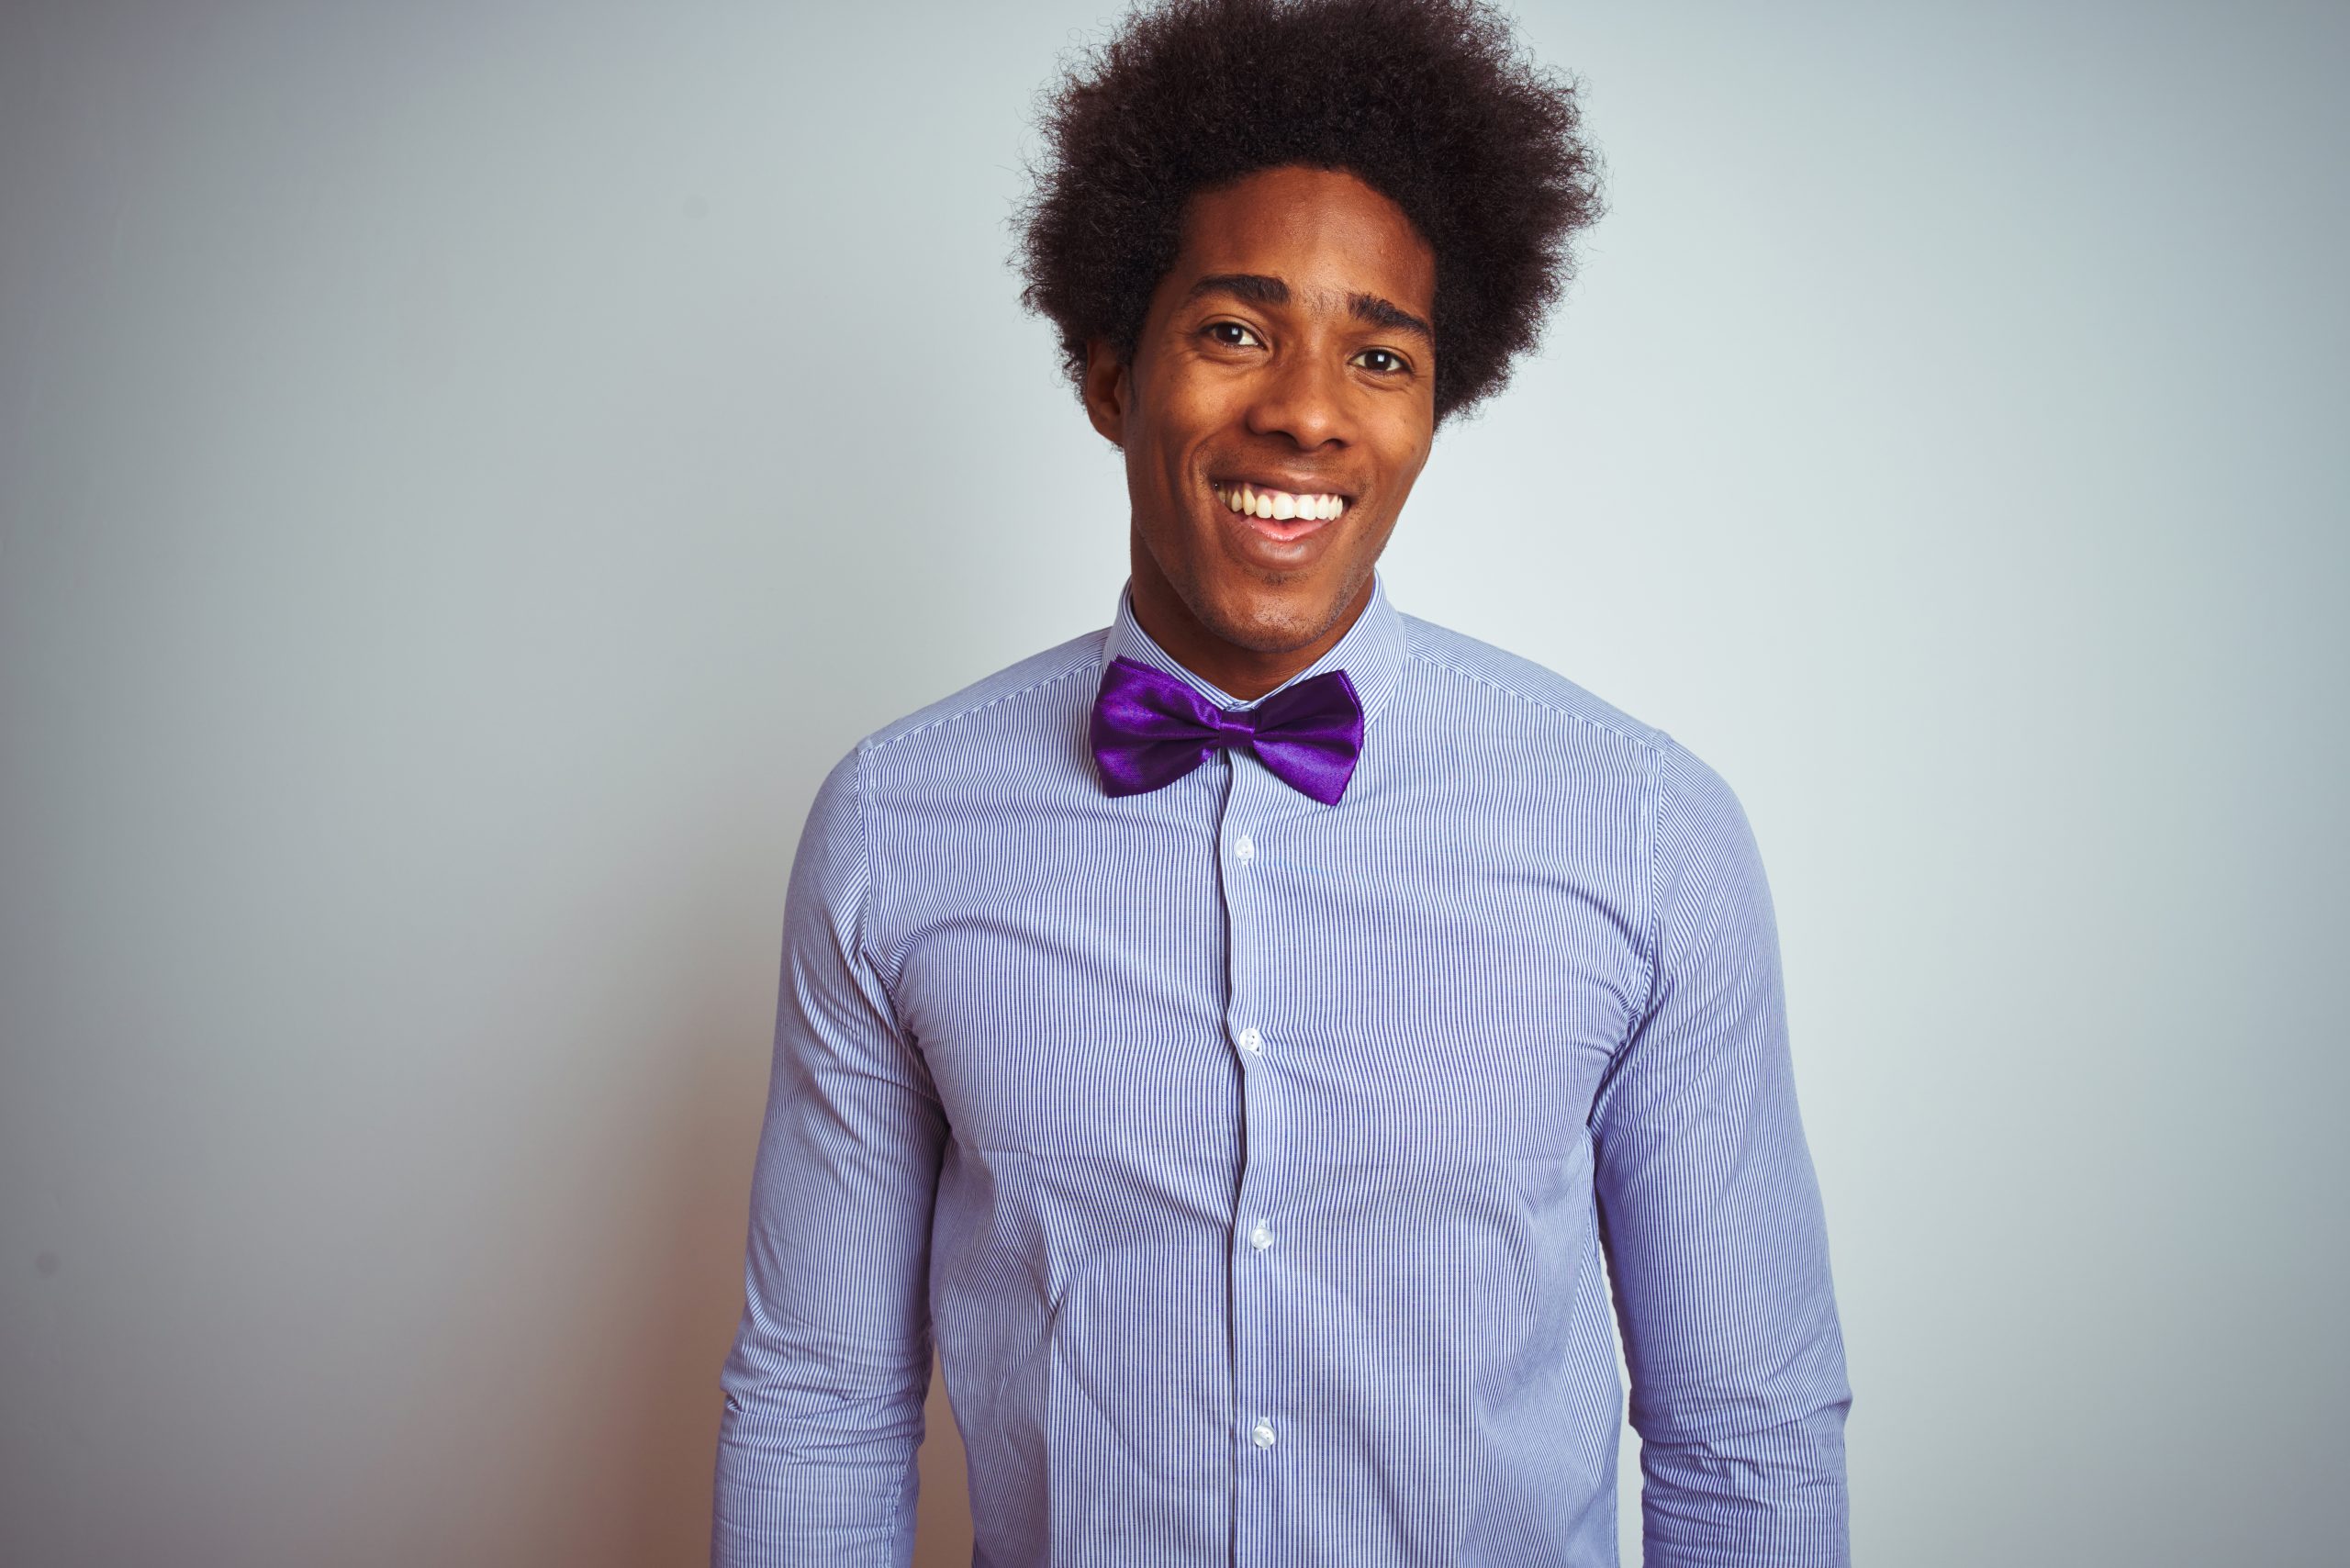 Young smiling man wearing a striped shirt and dark purple bowtie standing in front of a white wall